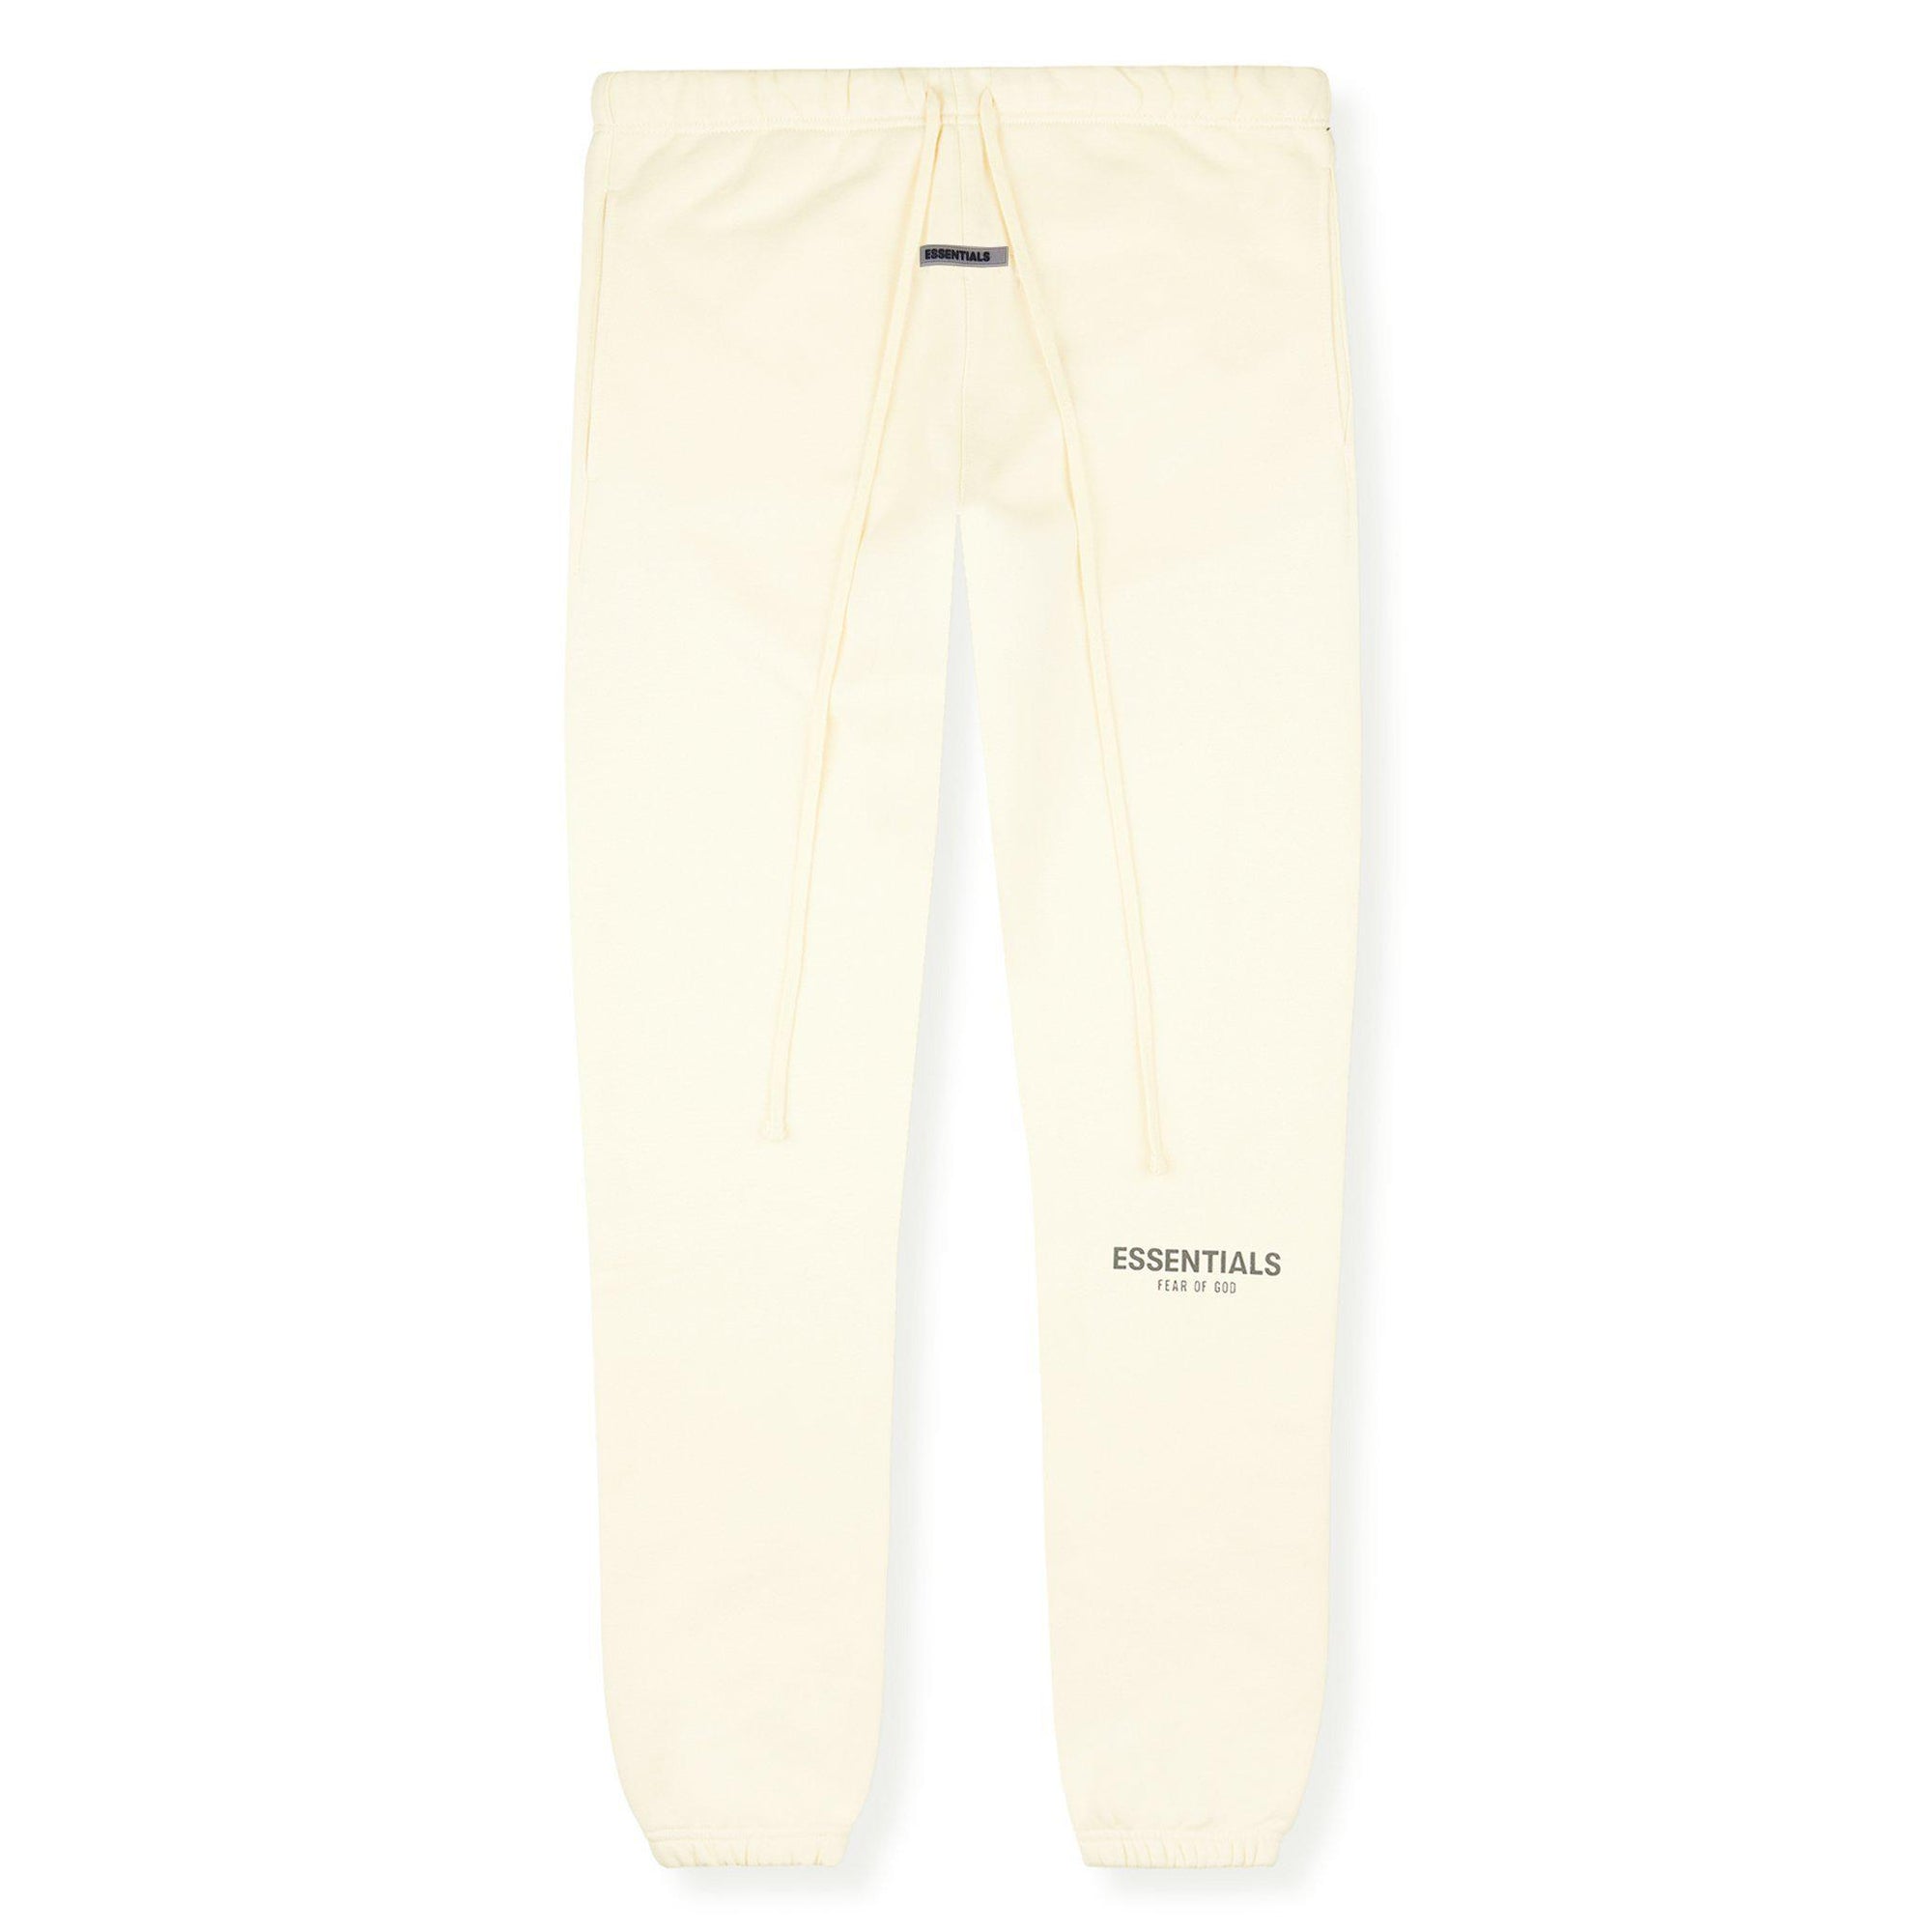 FEAR OF GOD ESSENTIALS Sweatpants (SS21) Buttercream | Waves Never Die | Fear of God | Pants